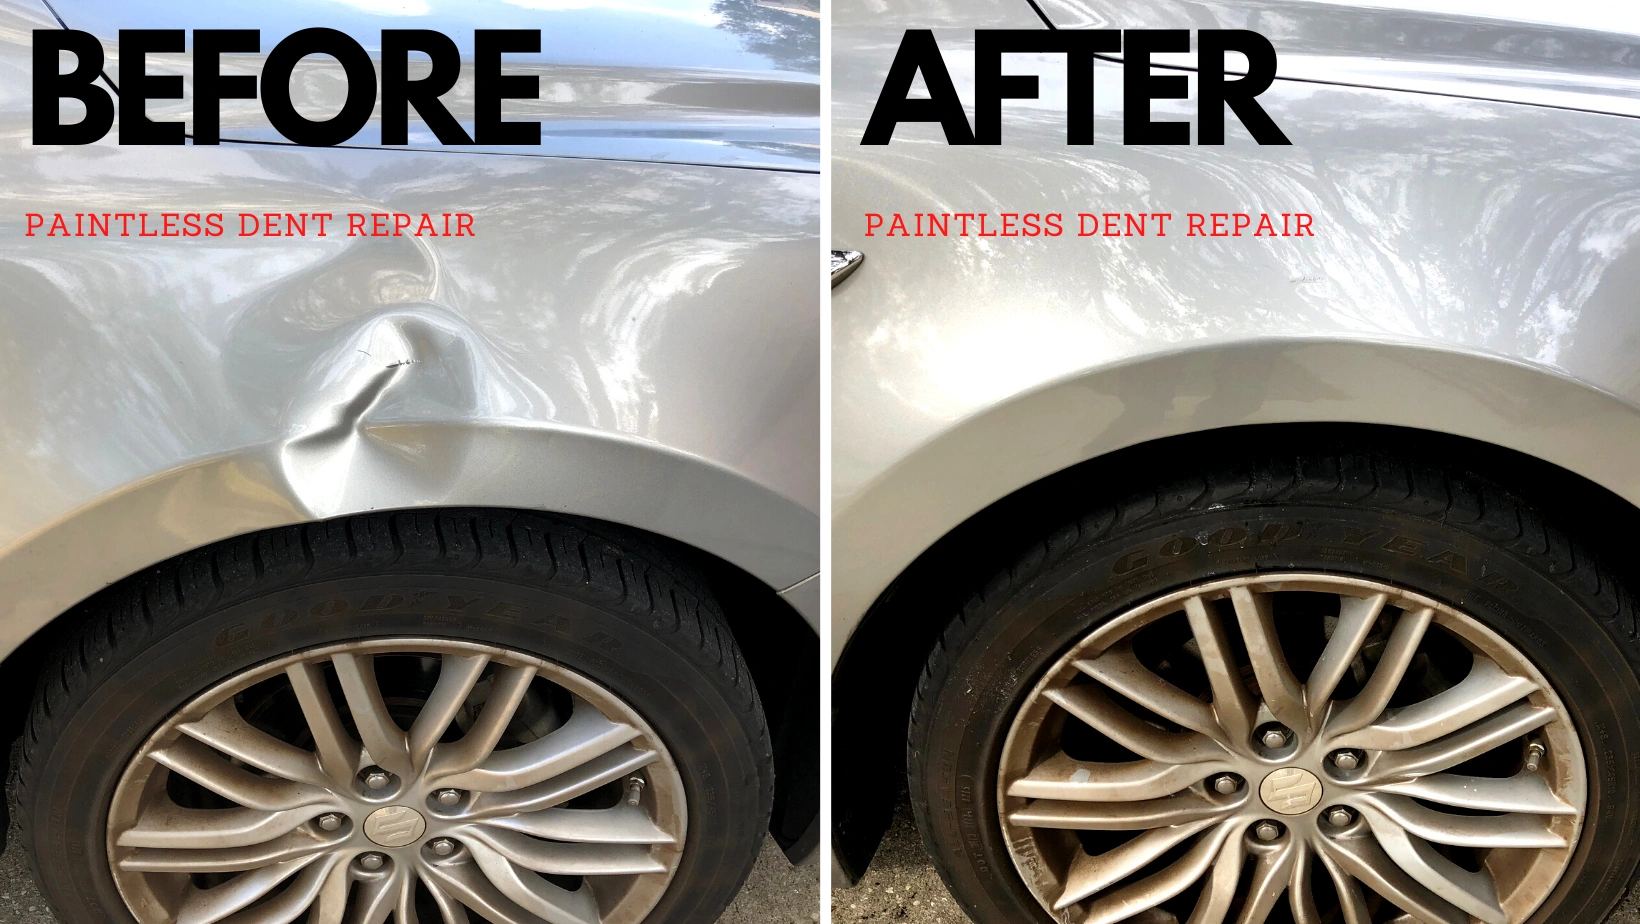 https://img1.wsimg.com/isteam/ip/cd33db4a-0300-4ecd-8506-994af68c5a1a/BEFORE%20PAINTLESS%20DENT%20REPAIR.png